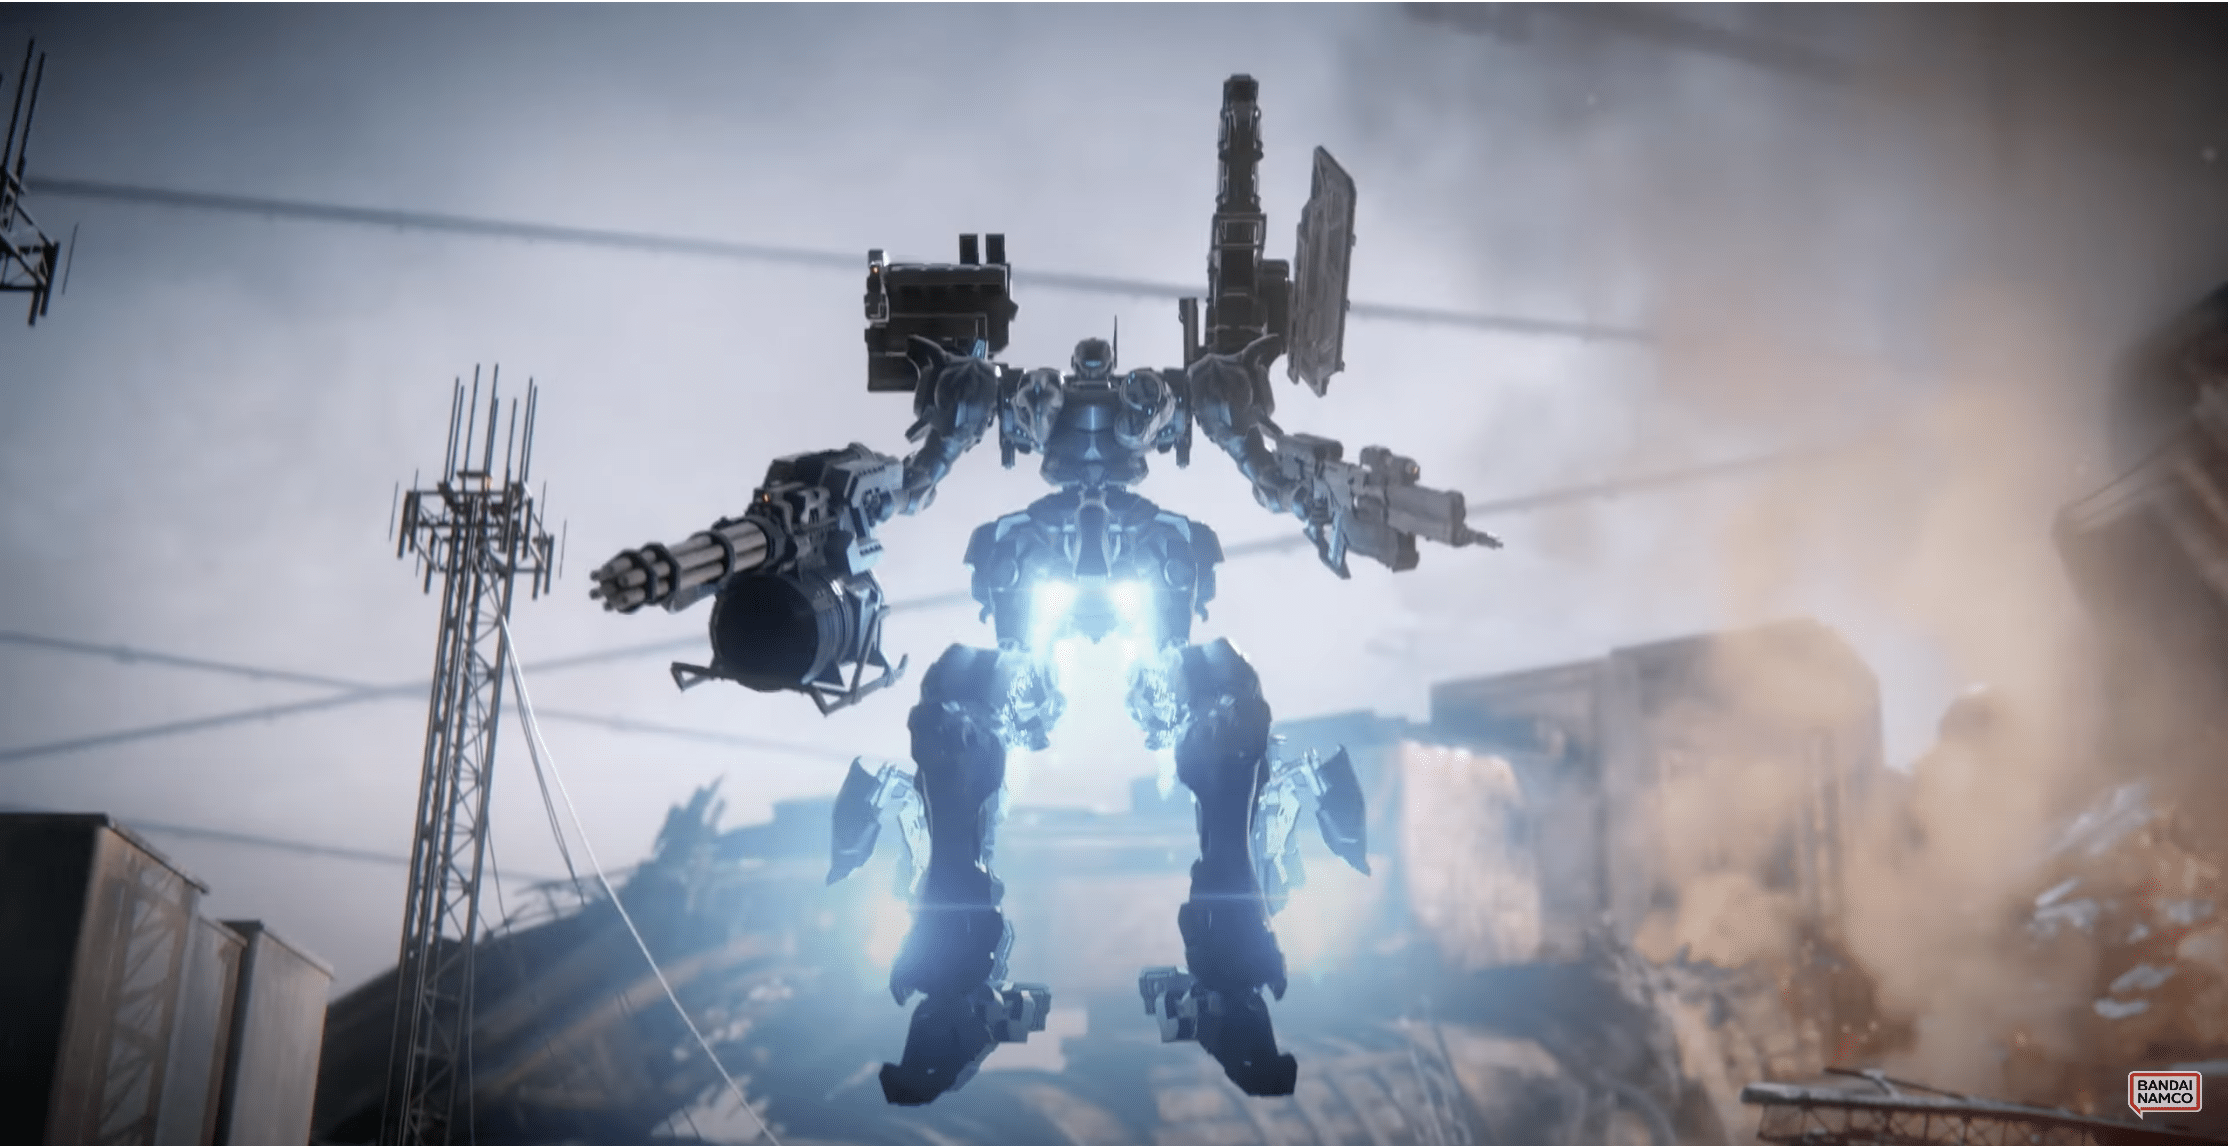 Armored Core VI: Fires of Rubicon download the new version for apple